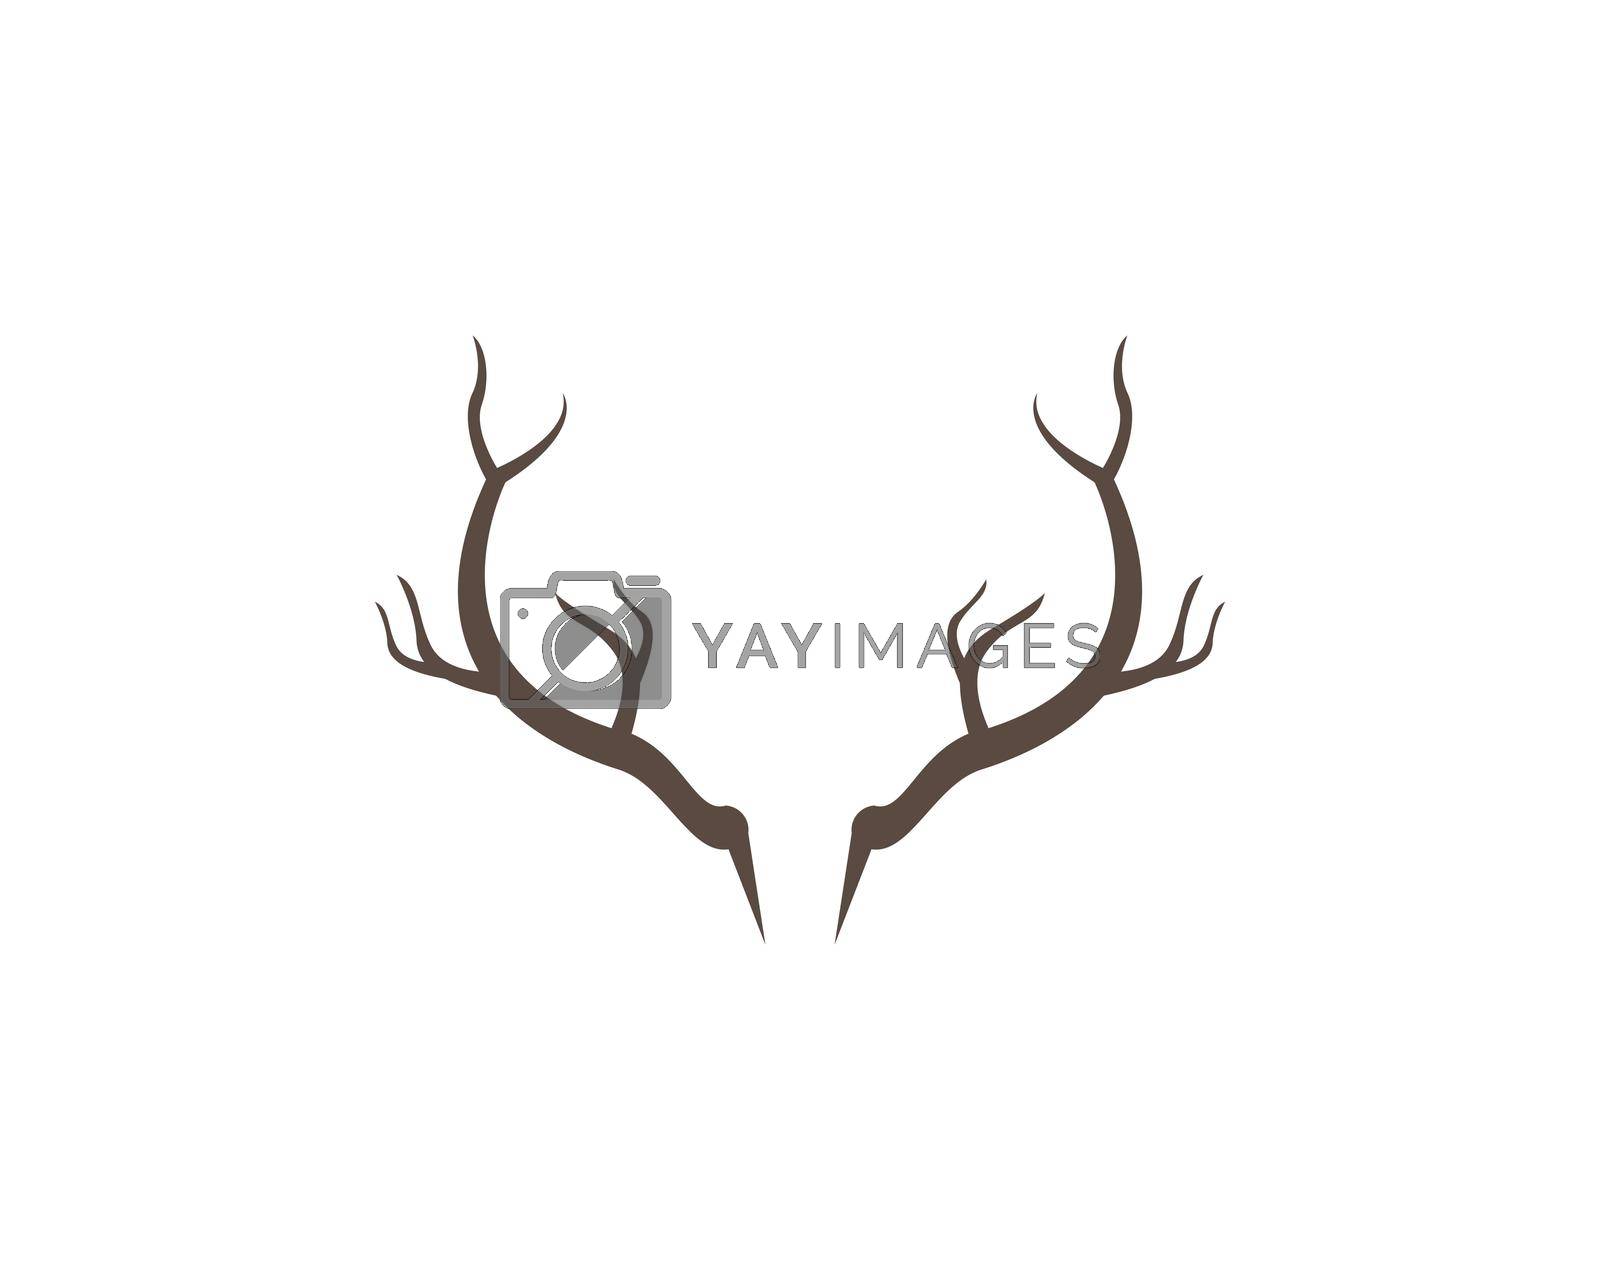 Royalty free image of Antler ilustration logo vector by awk